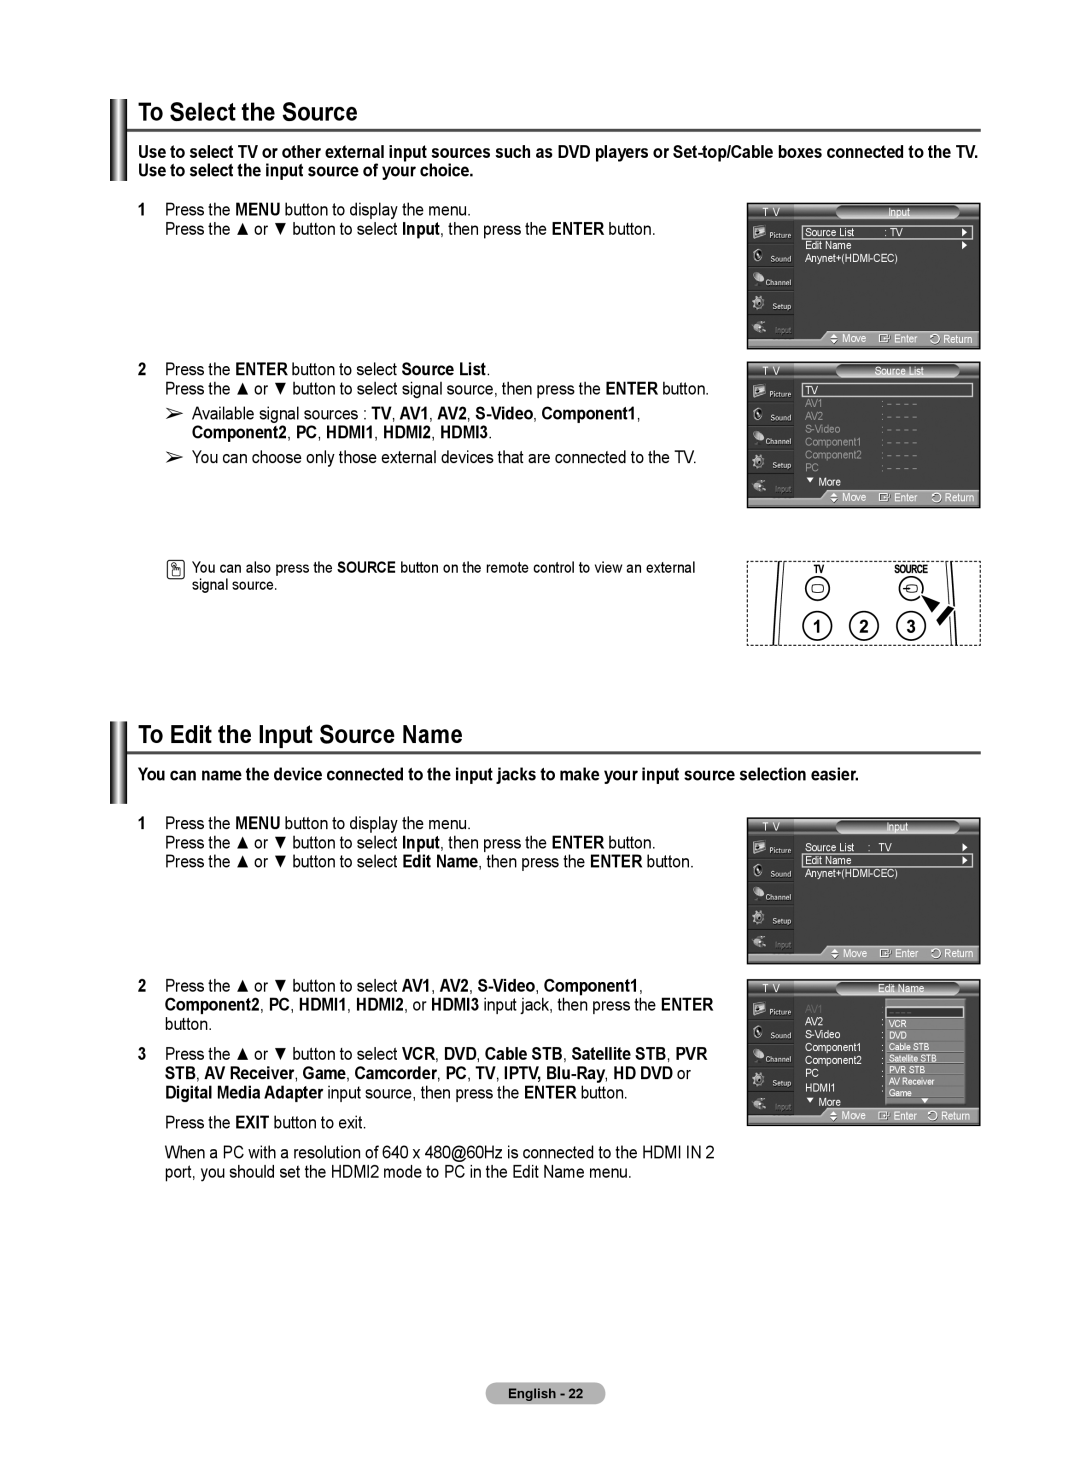 Samsung 460 user manual To Select the Source, To Edit the Input Source Name 